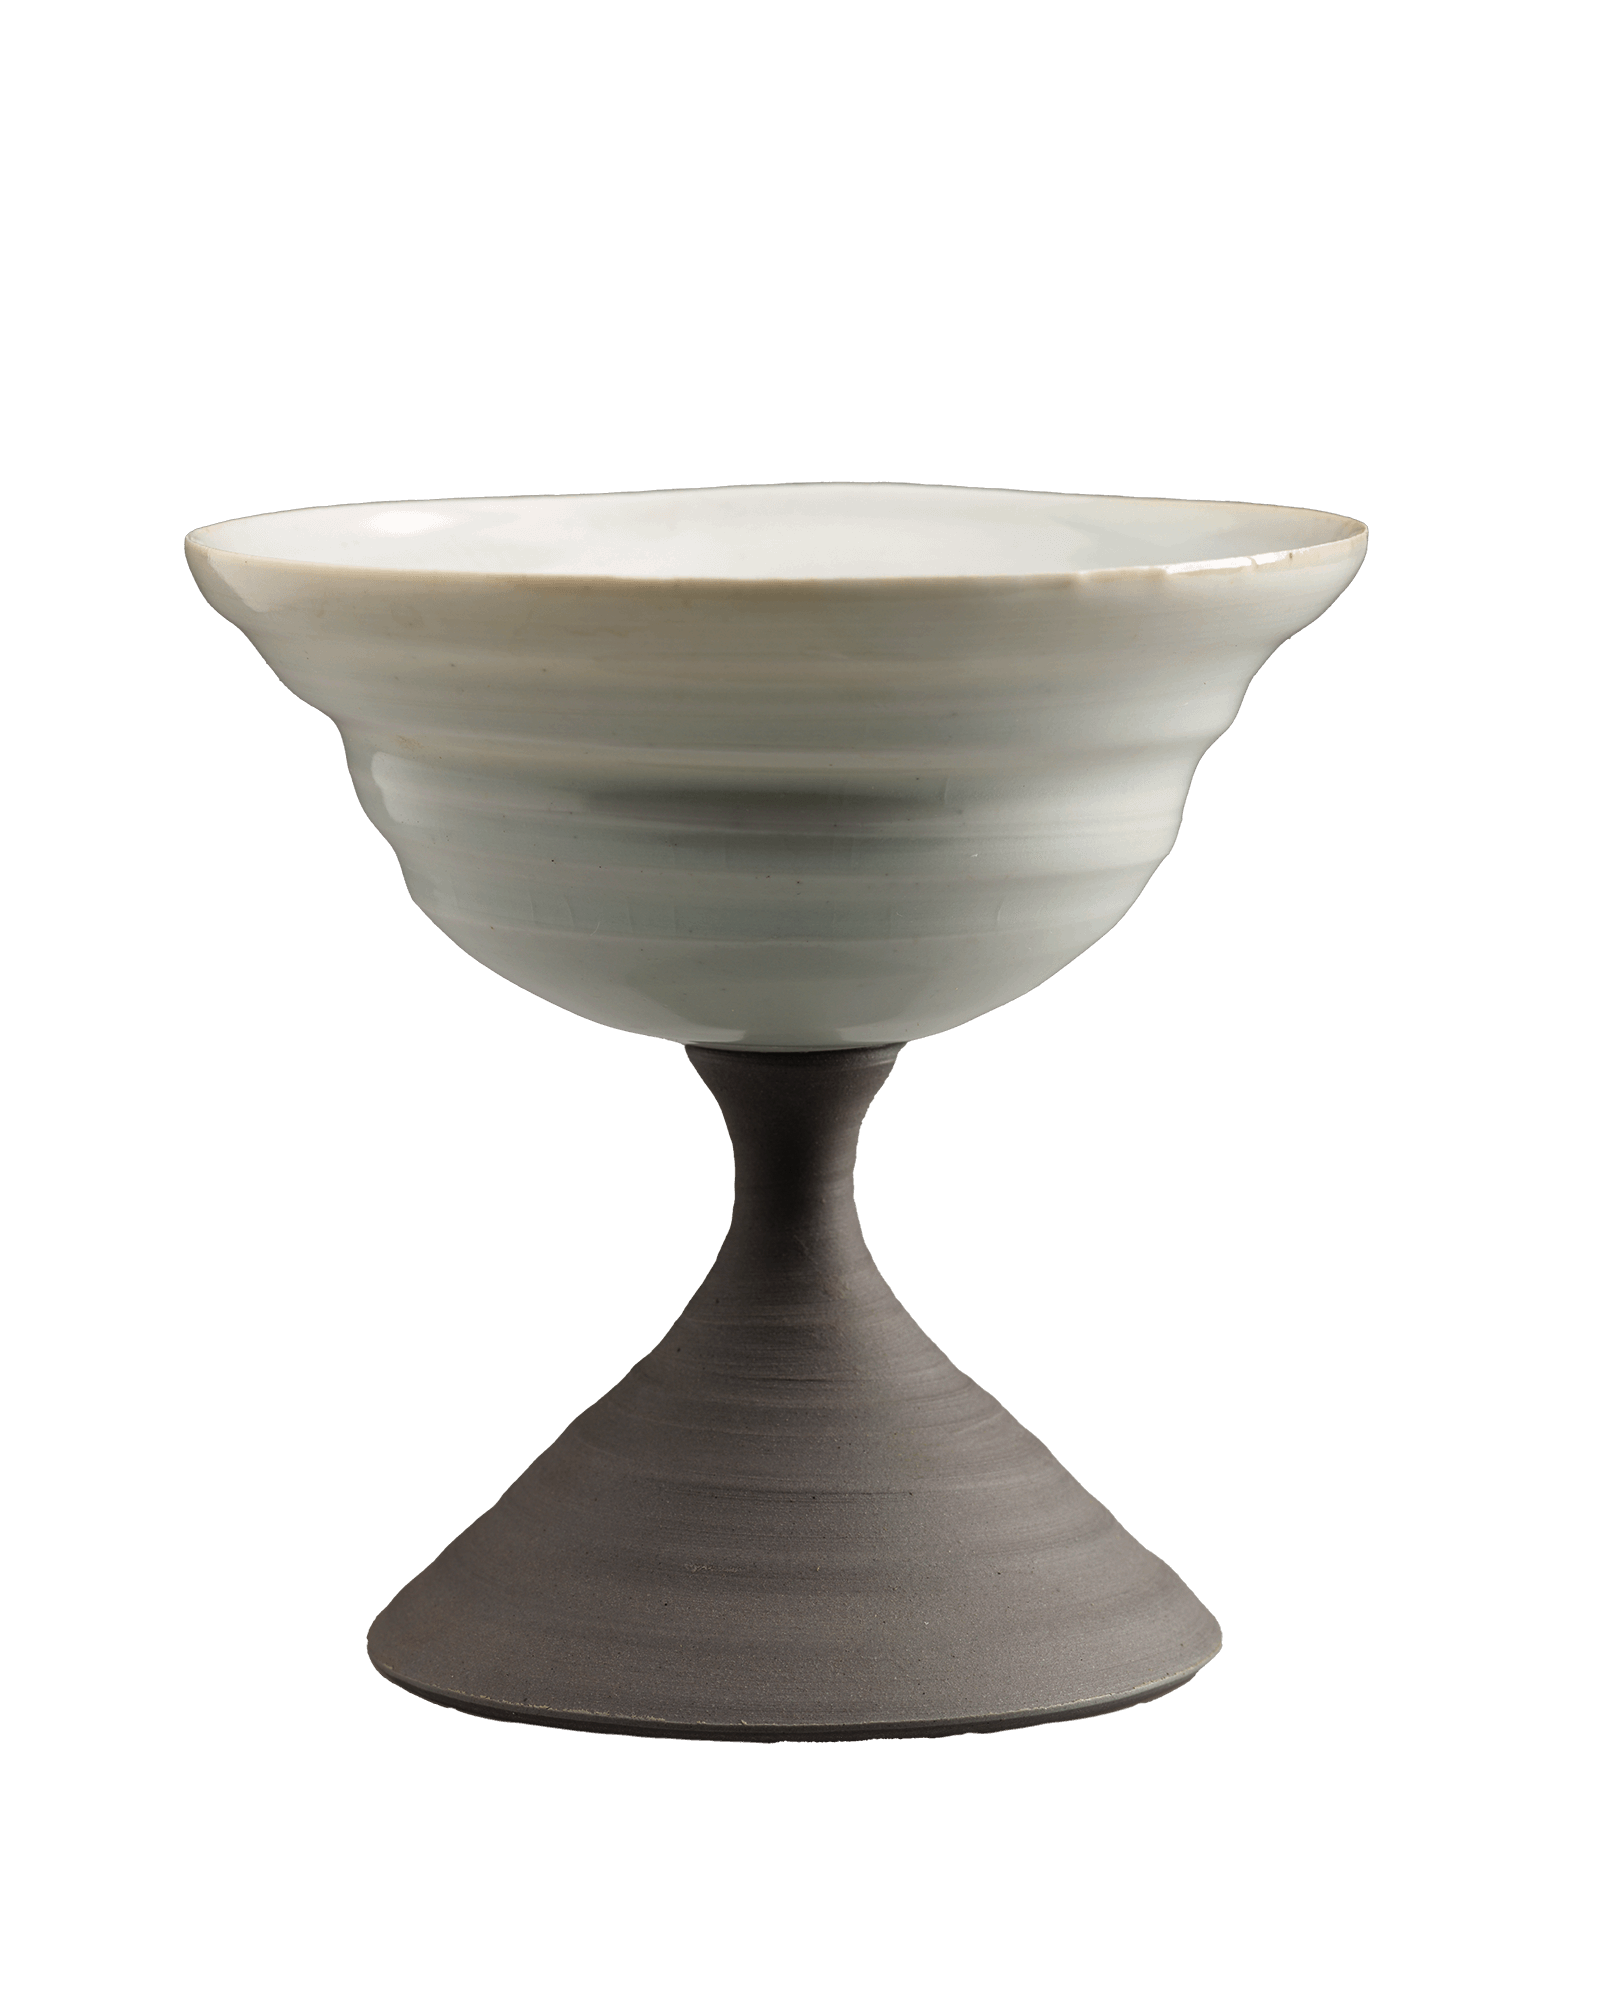 Porcelain compote-style bowl with light grey base and stem